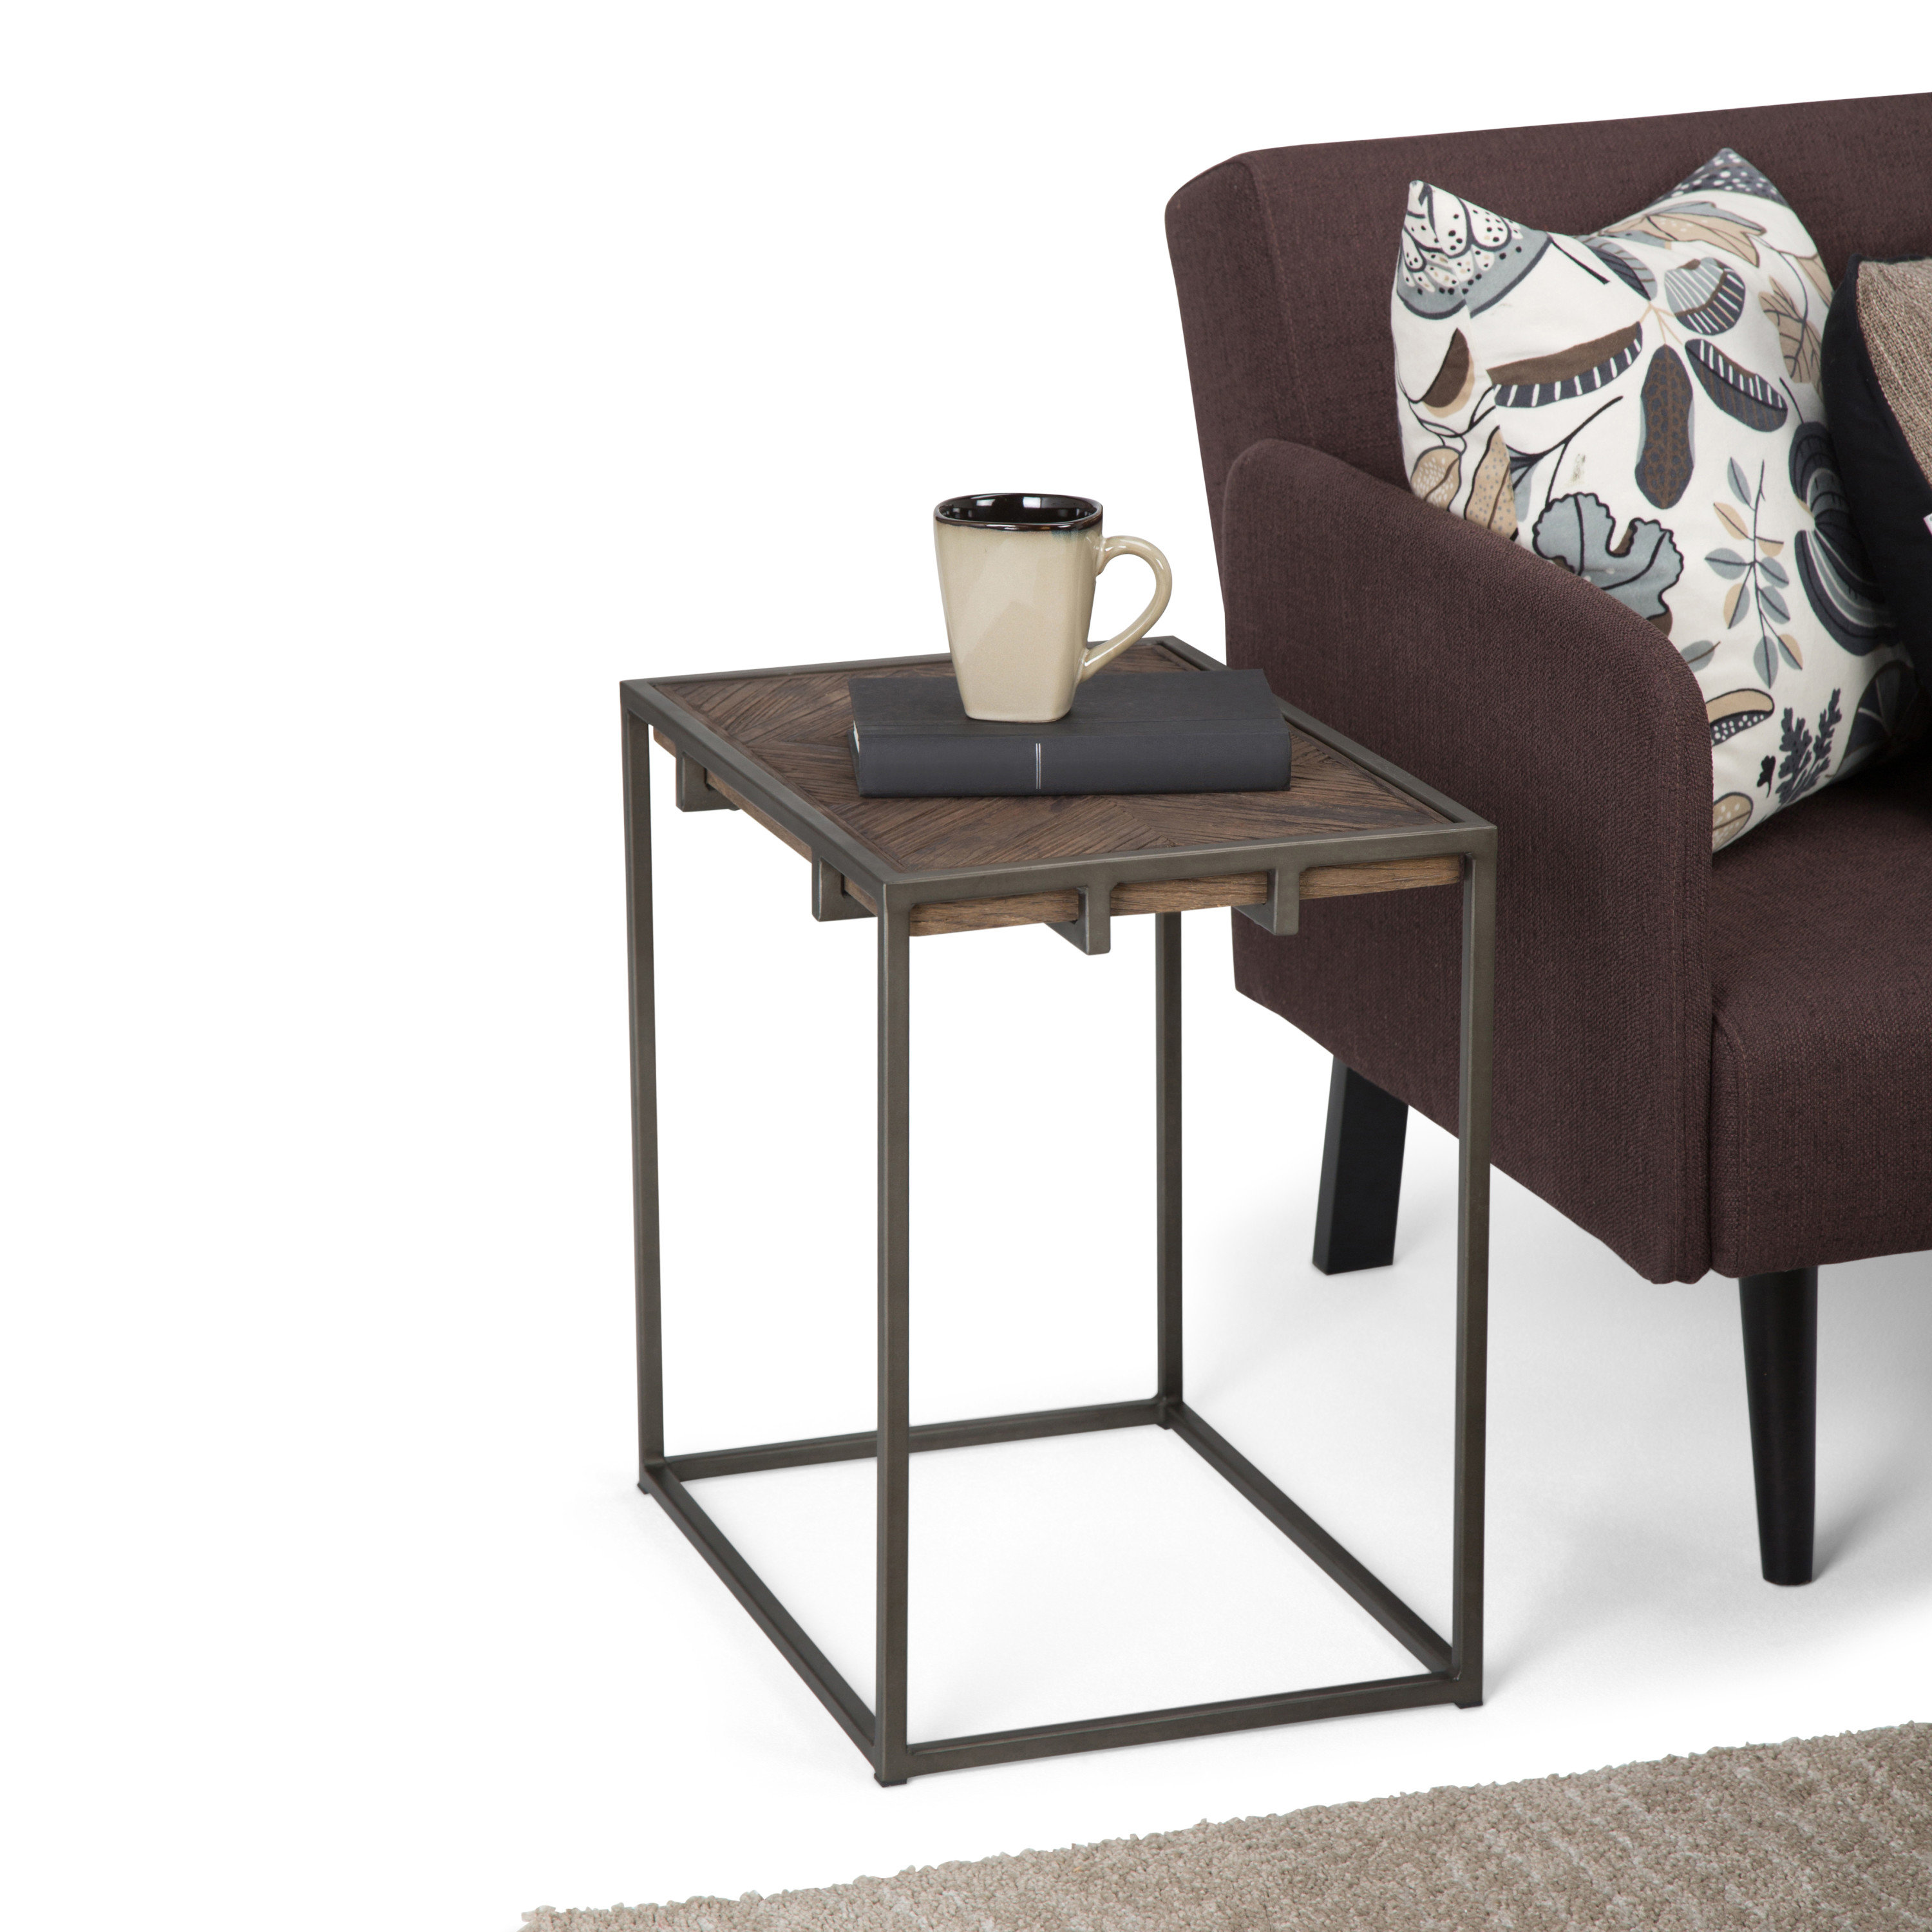 santa end table avery narrow glass top accent farm kitchen living room nest tables build wood coffee and wine rack girls desk target windham side base garden seats saddle drum